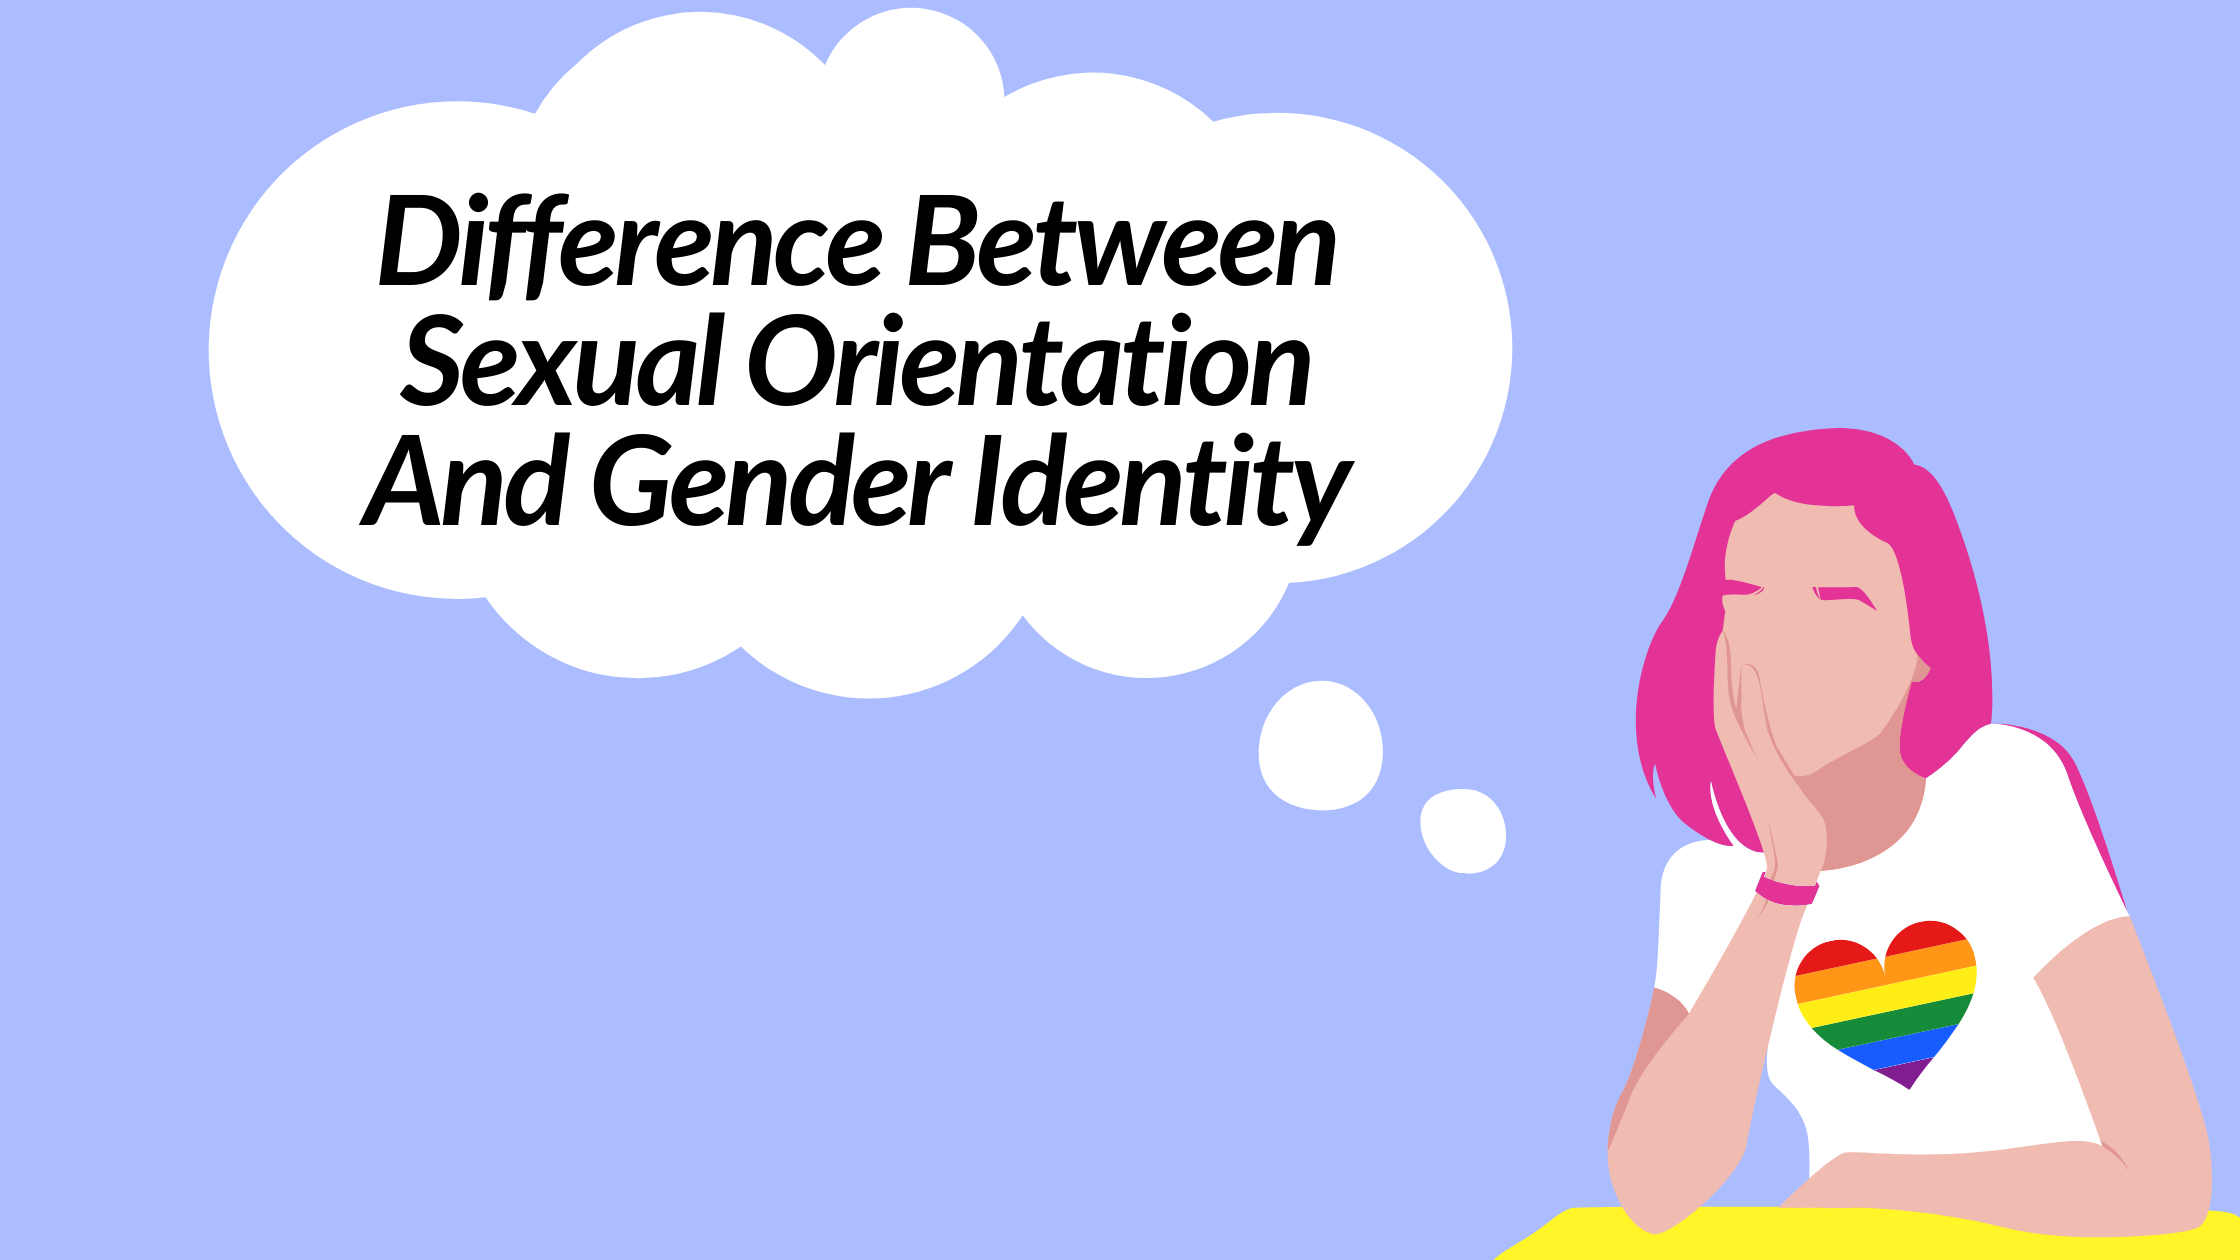 Difference Between Sexual Orientation And Gender Identity